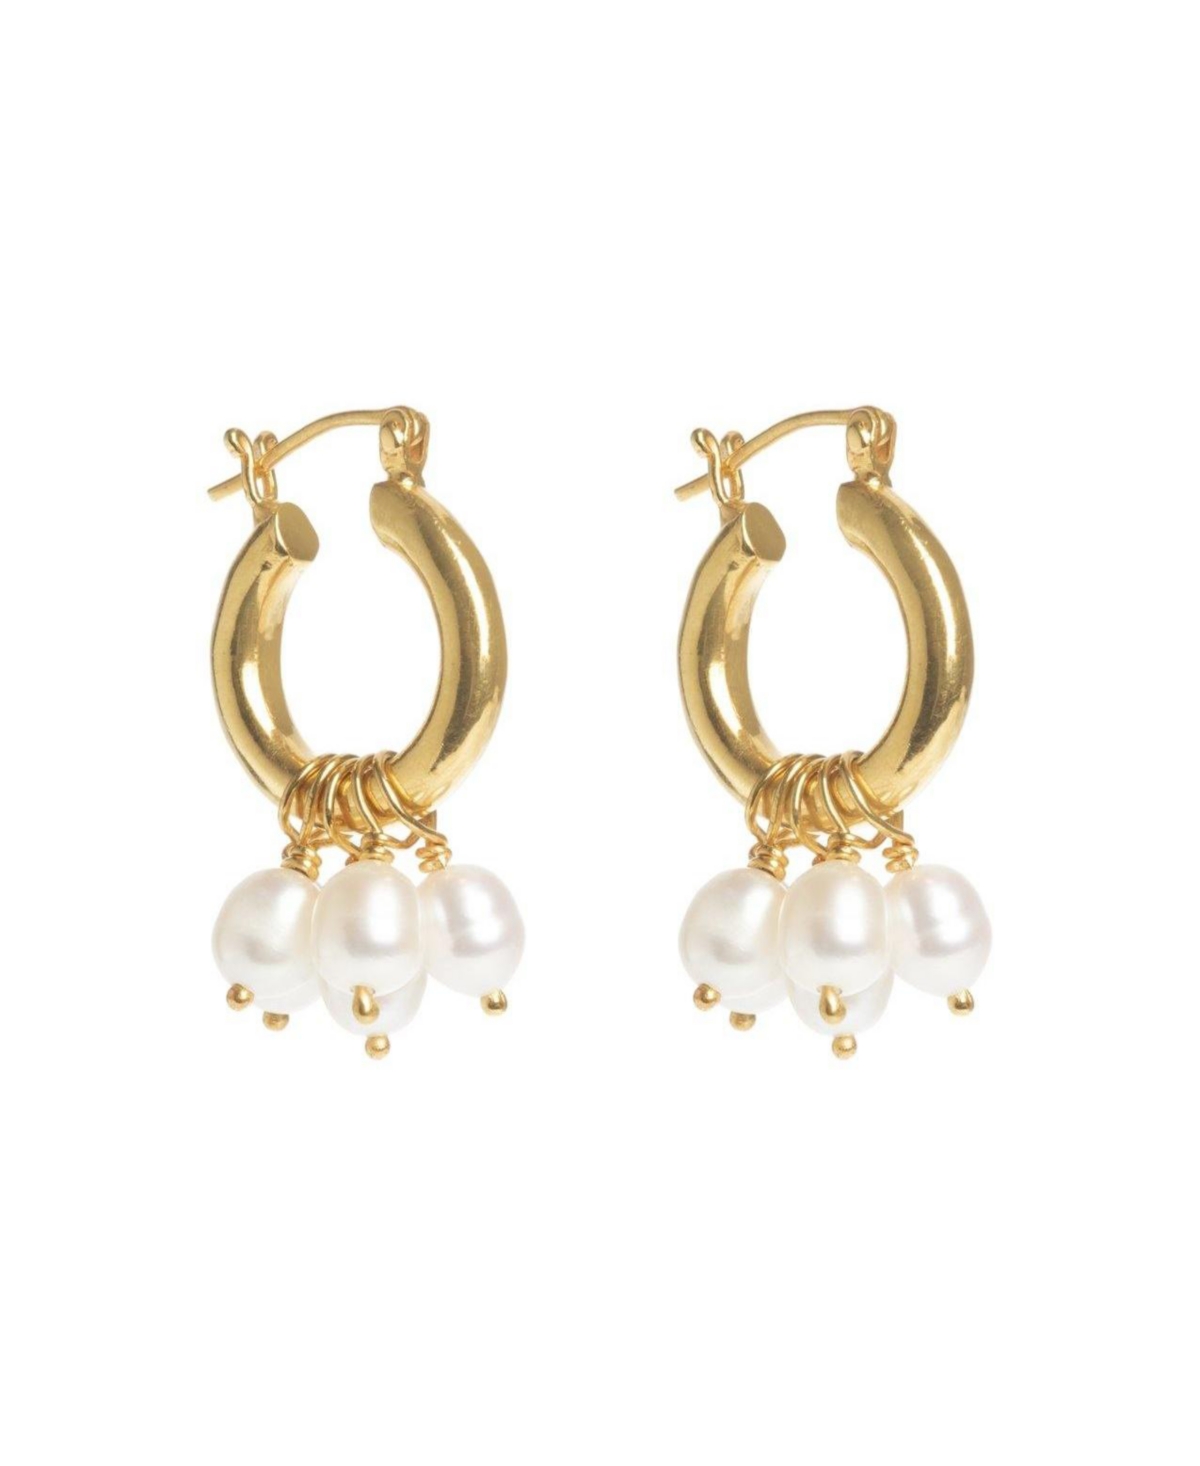 Mini Hoops With Detachable Pearls Earrings - Gold